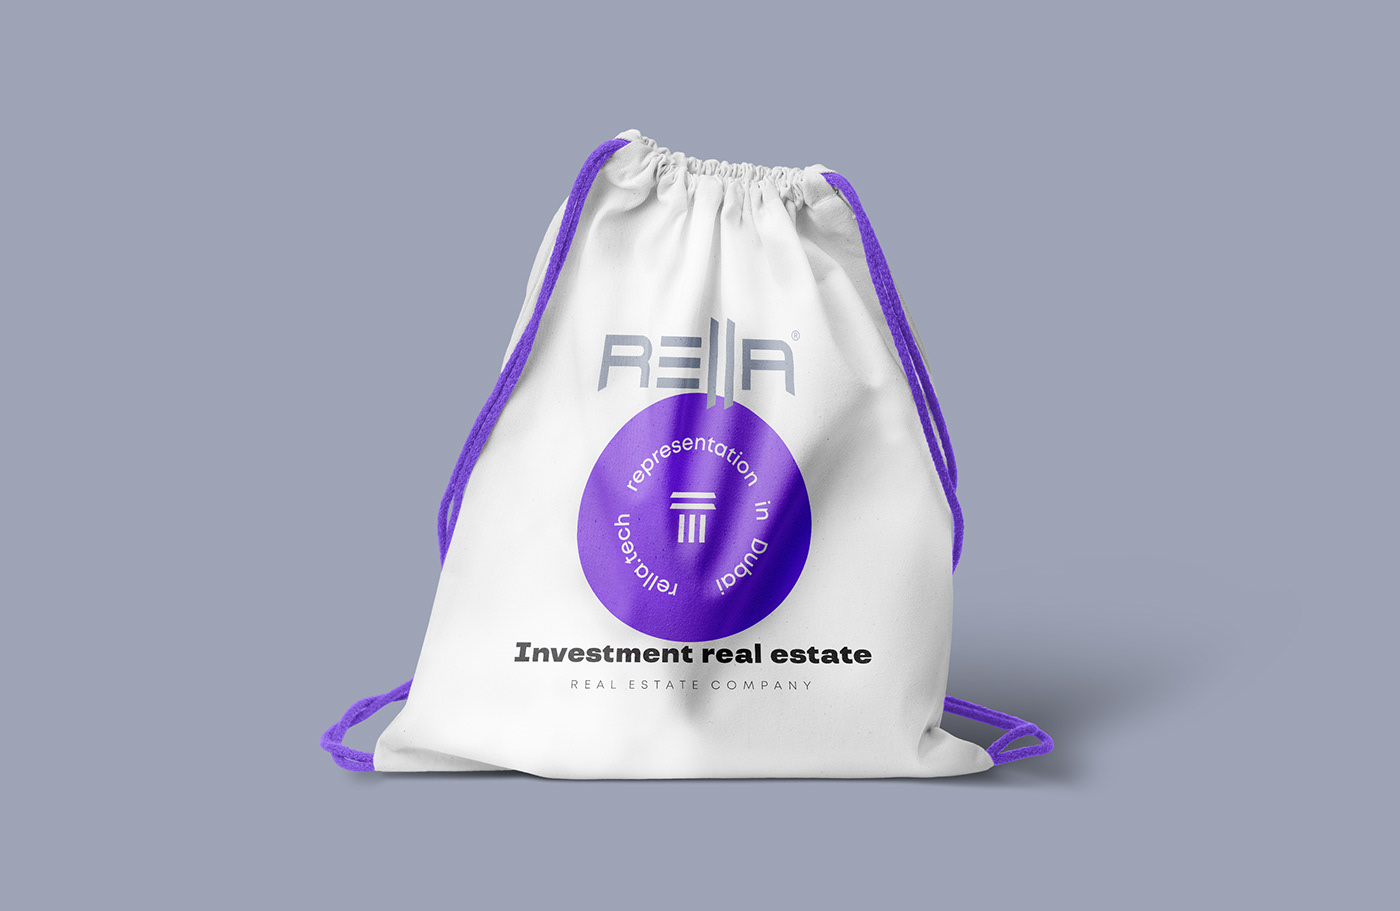 Design of the company's branded bag.